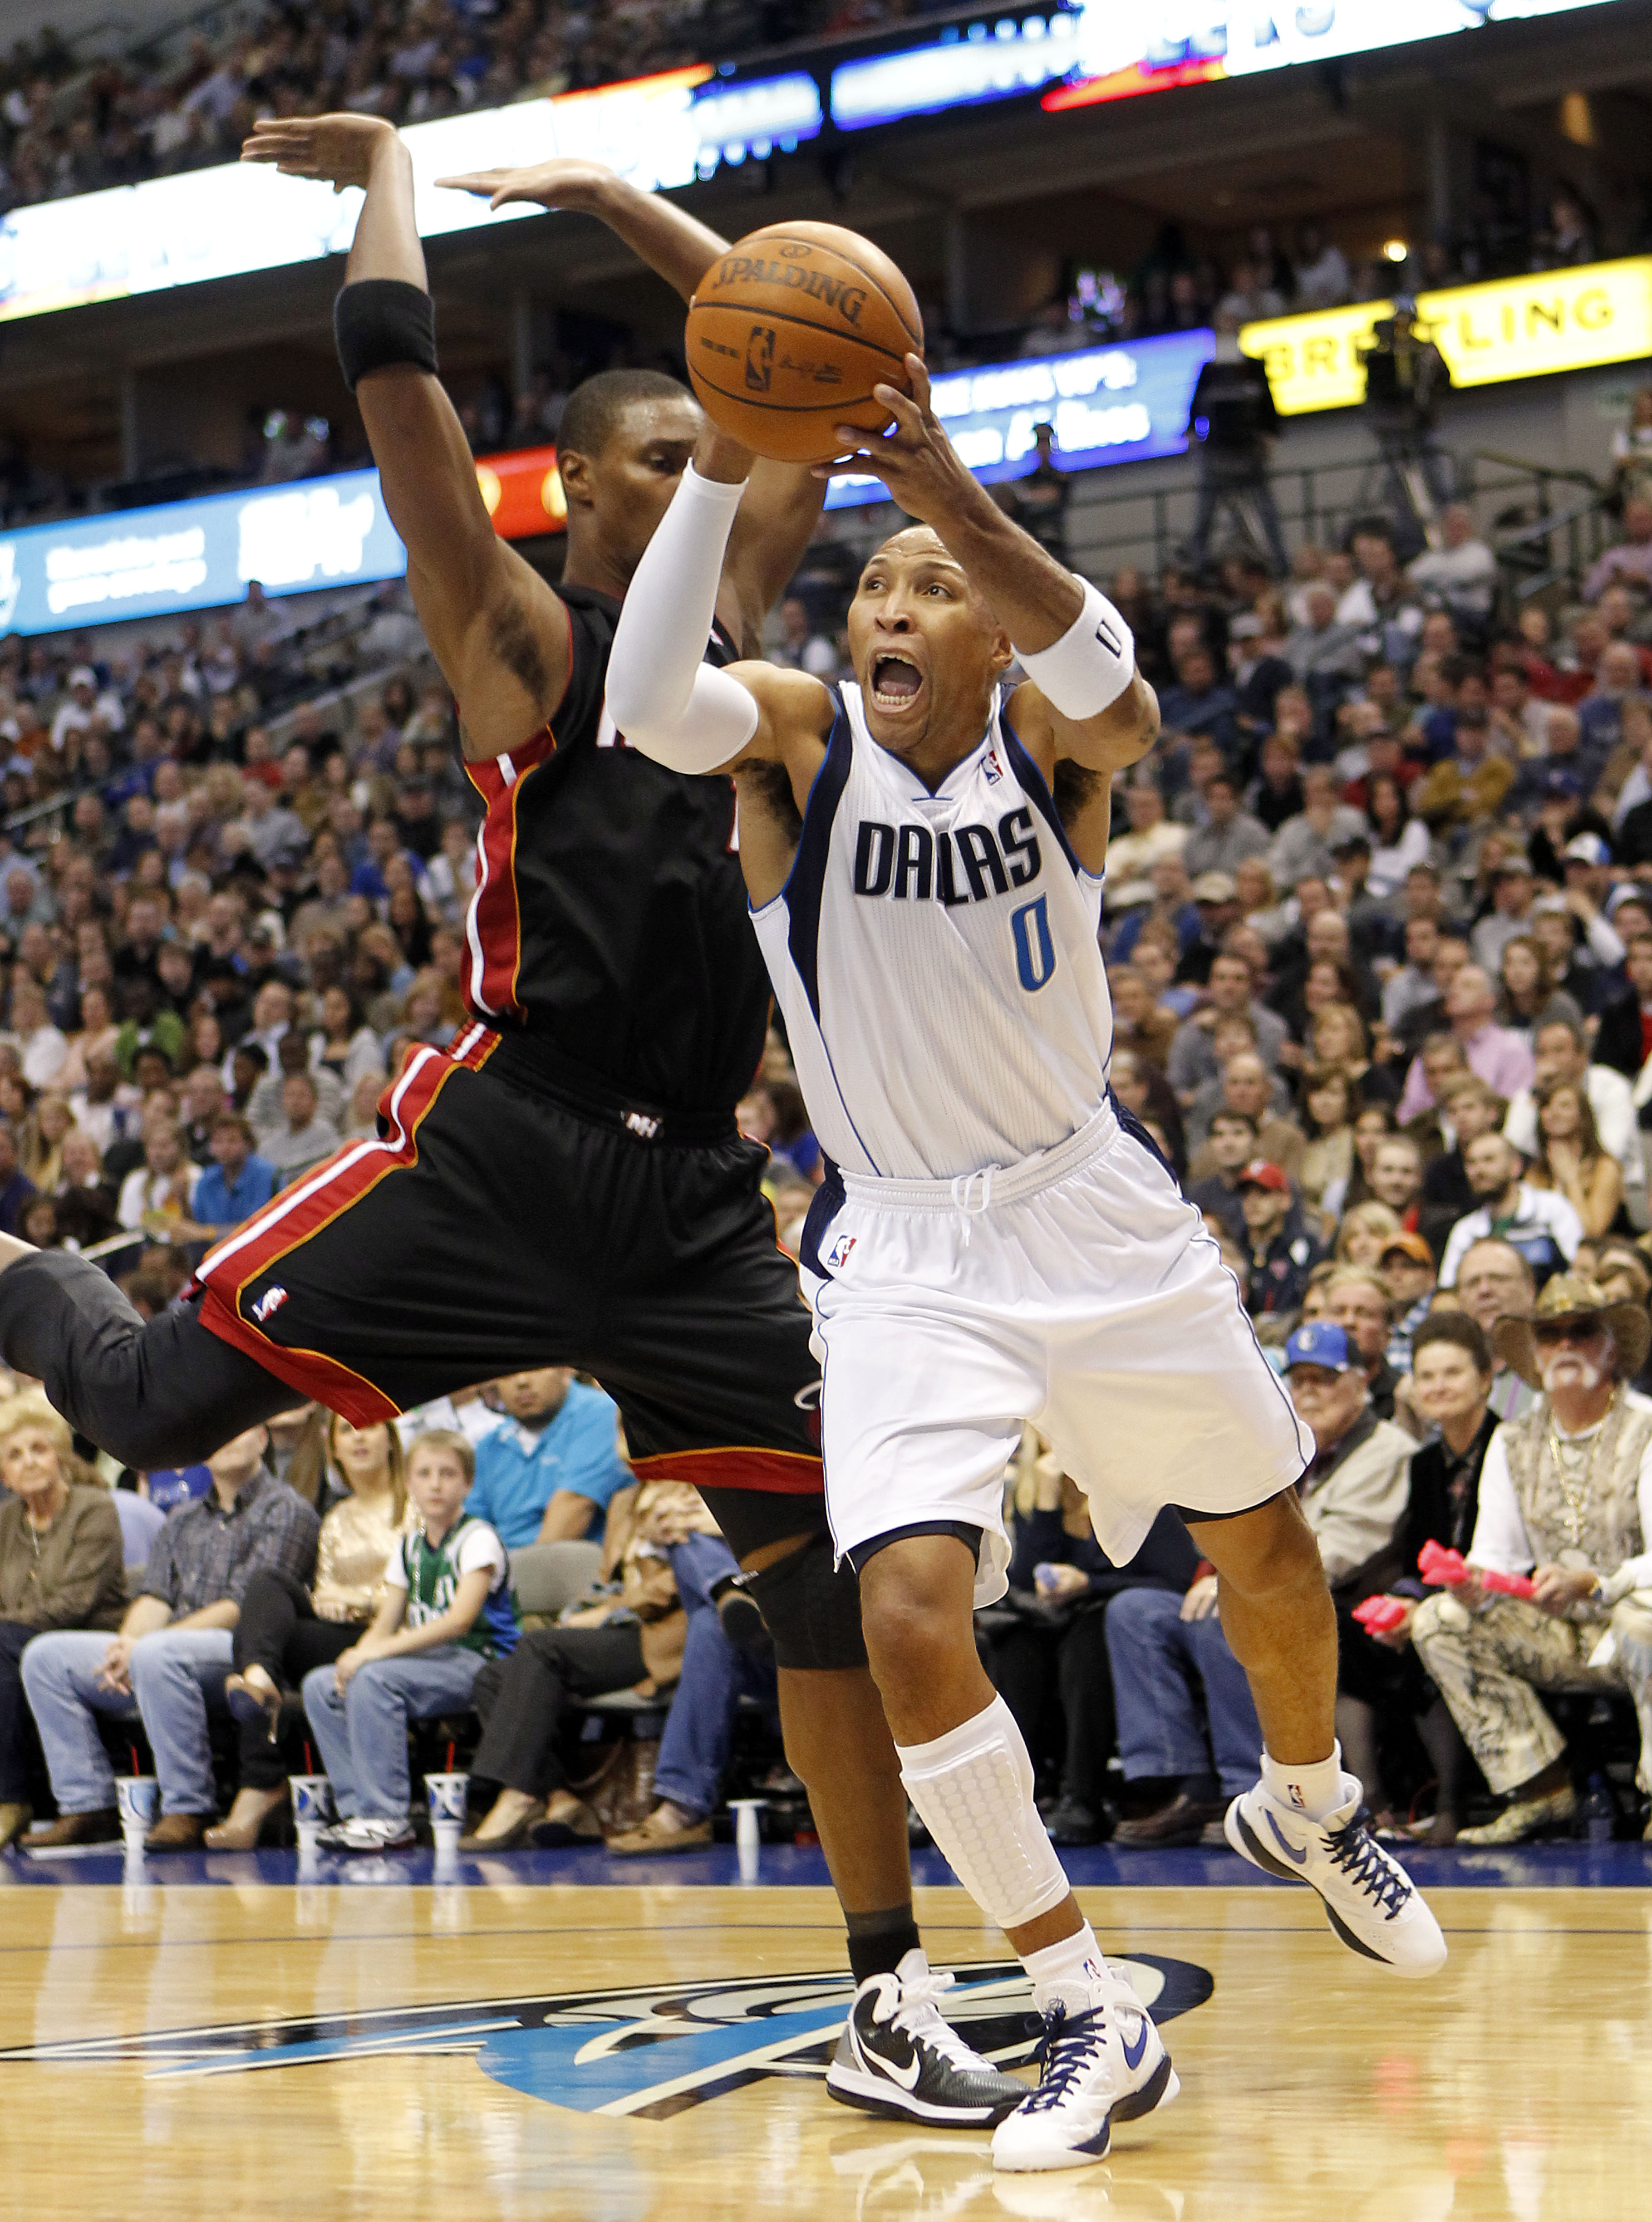 DALLAS - NOVEMBER 27: Shawn Marion #0 of the Dallas Mavericks drives by Chris Bosh #1 of the Miami Heat on November 27, 2010 at the American Airlines Center in Dallas, Texas. NOTE TO USER: User expressly acknowledges and agrees that, by downloading and or